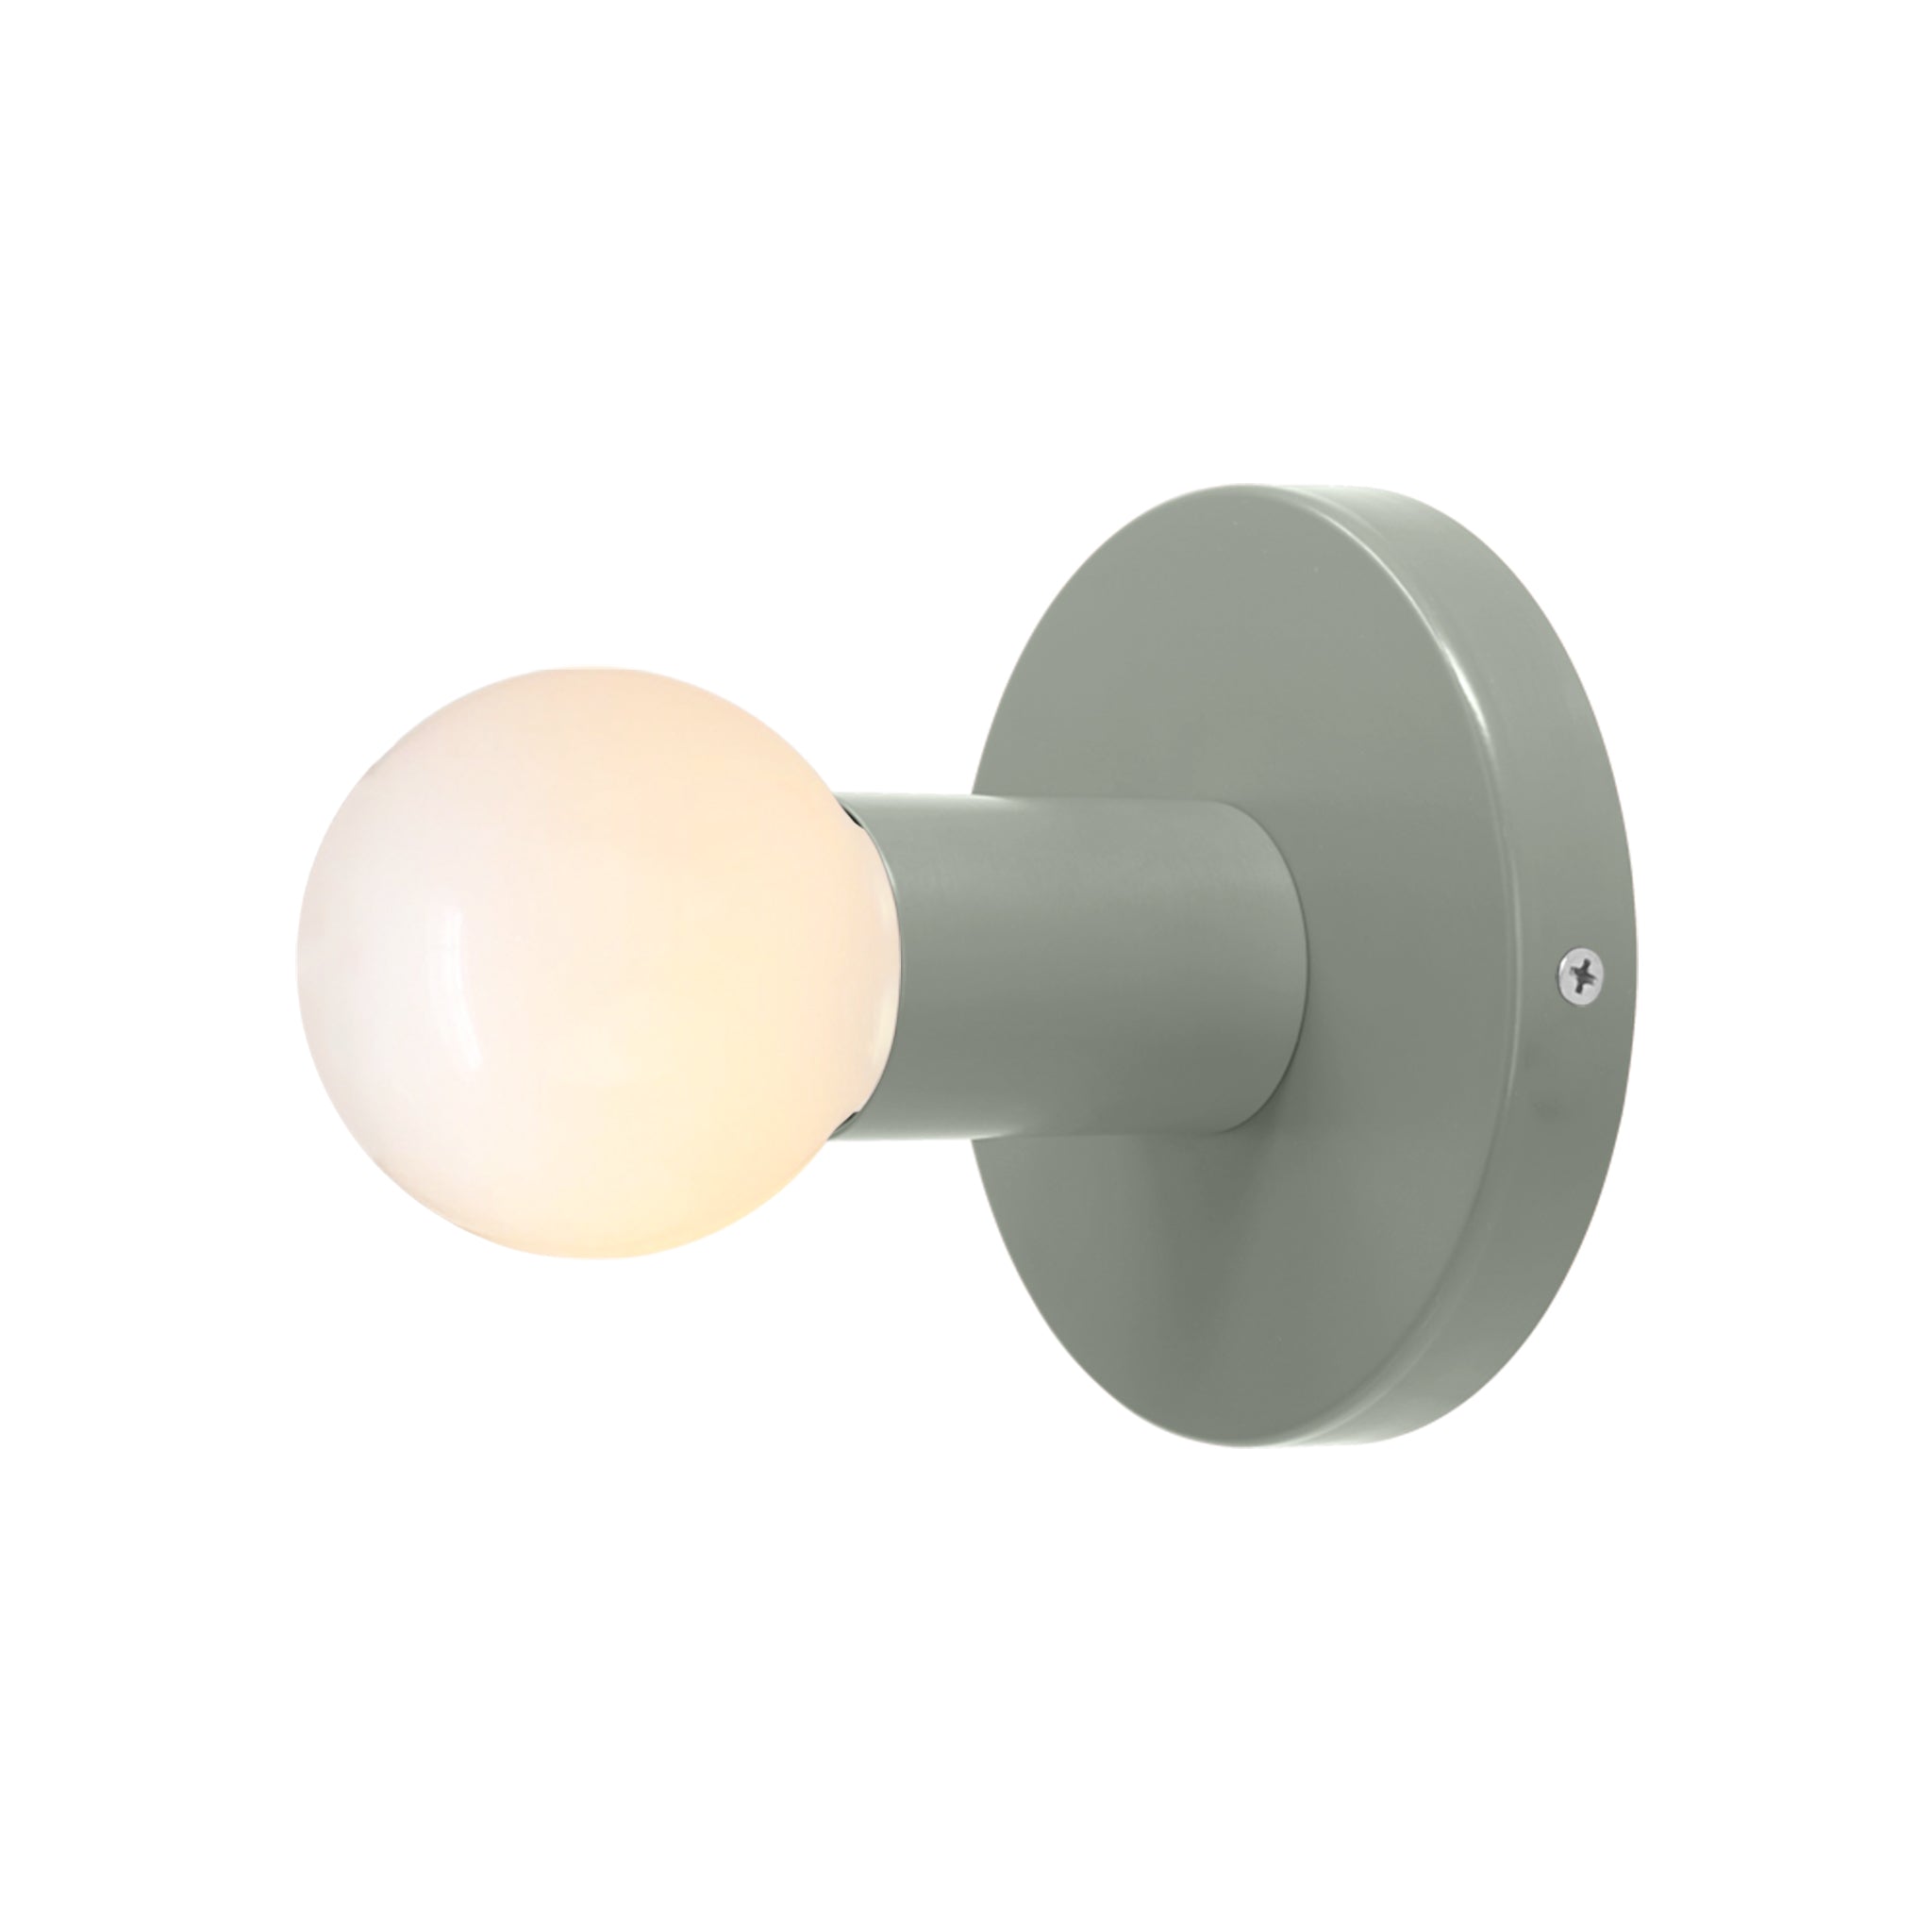 Nickel and spa color Twink sconce Dutton Brown lighting